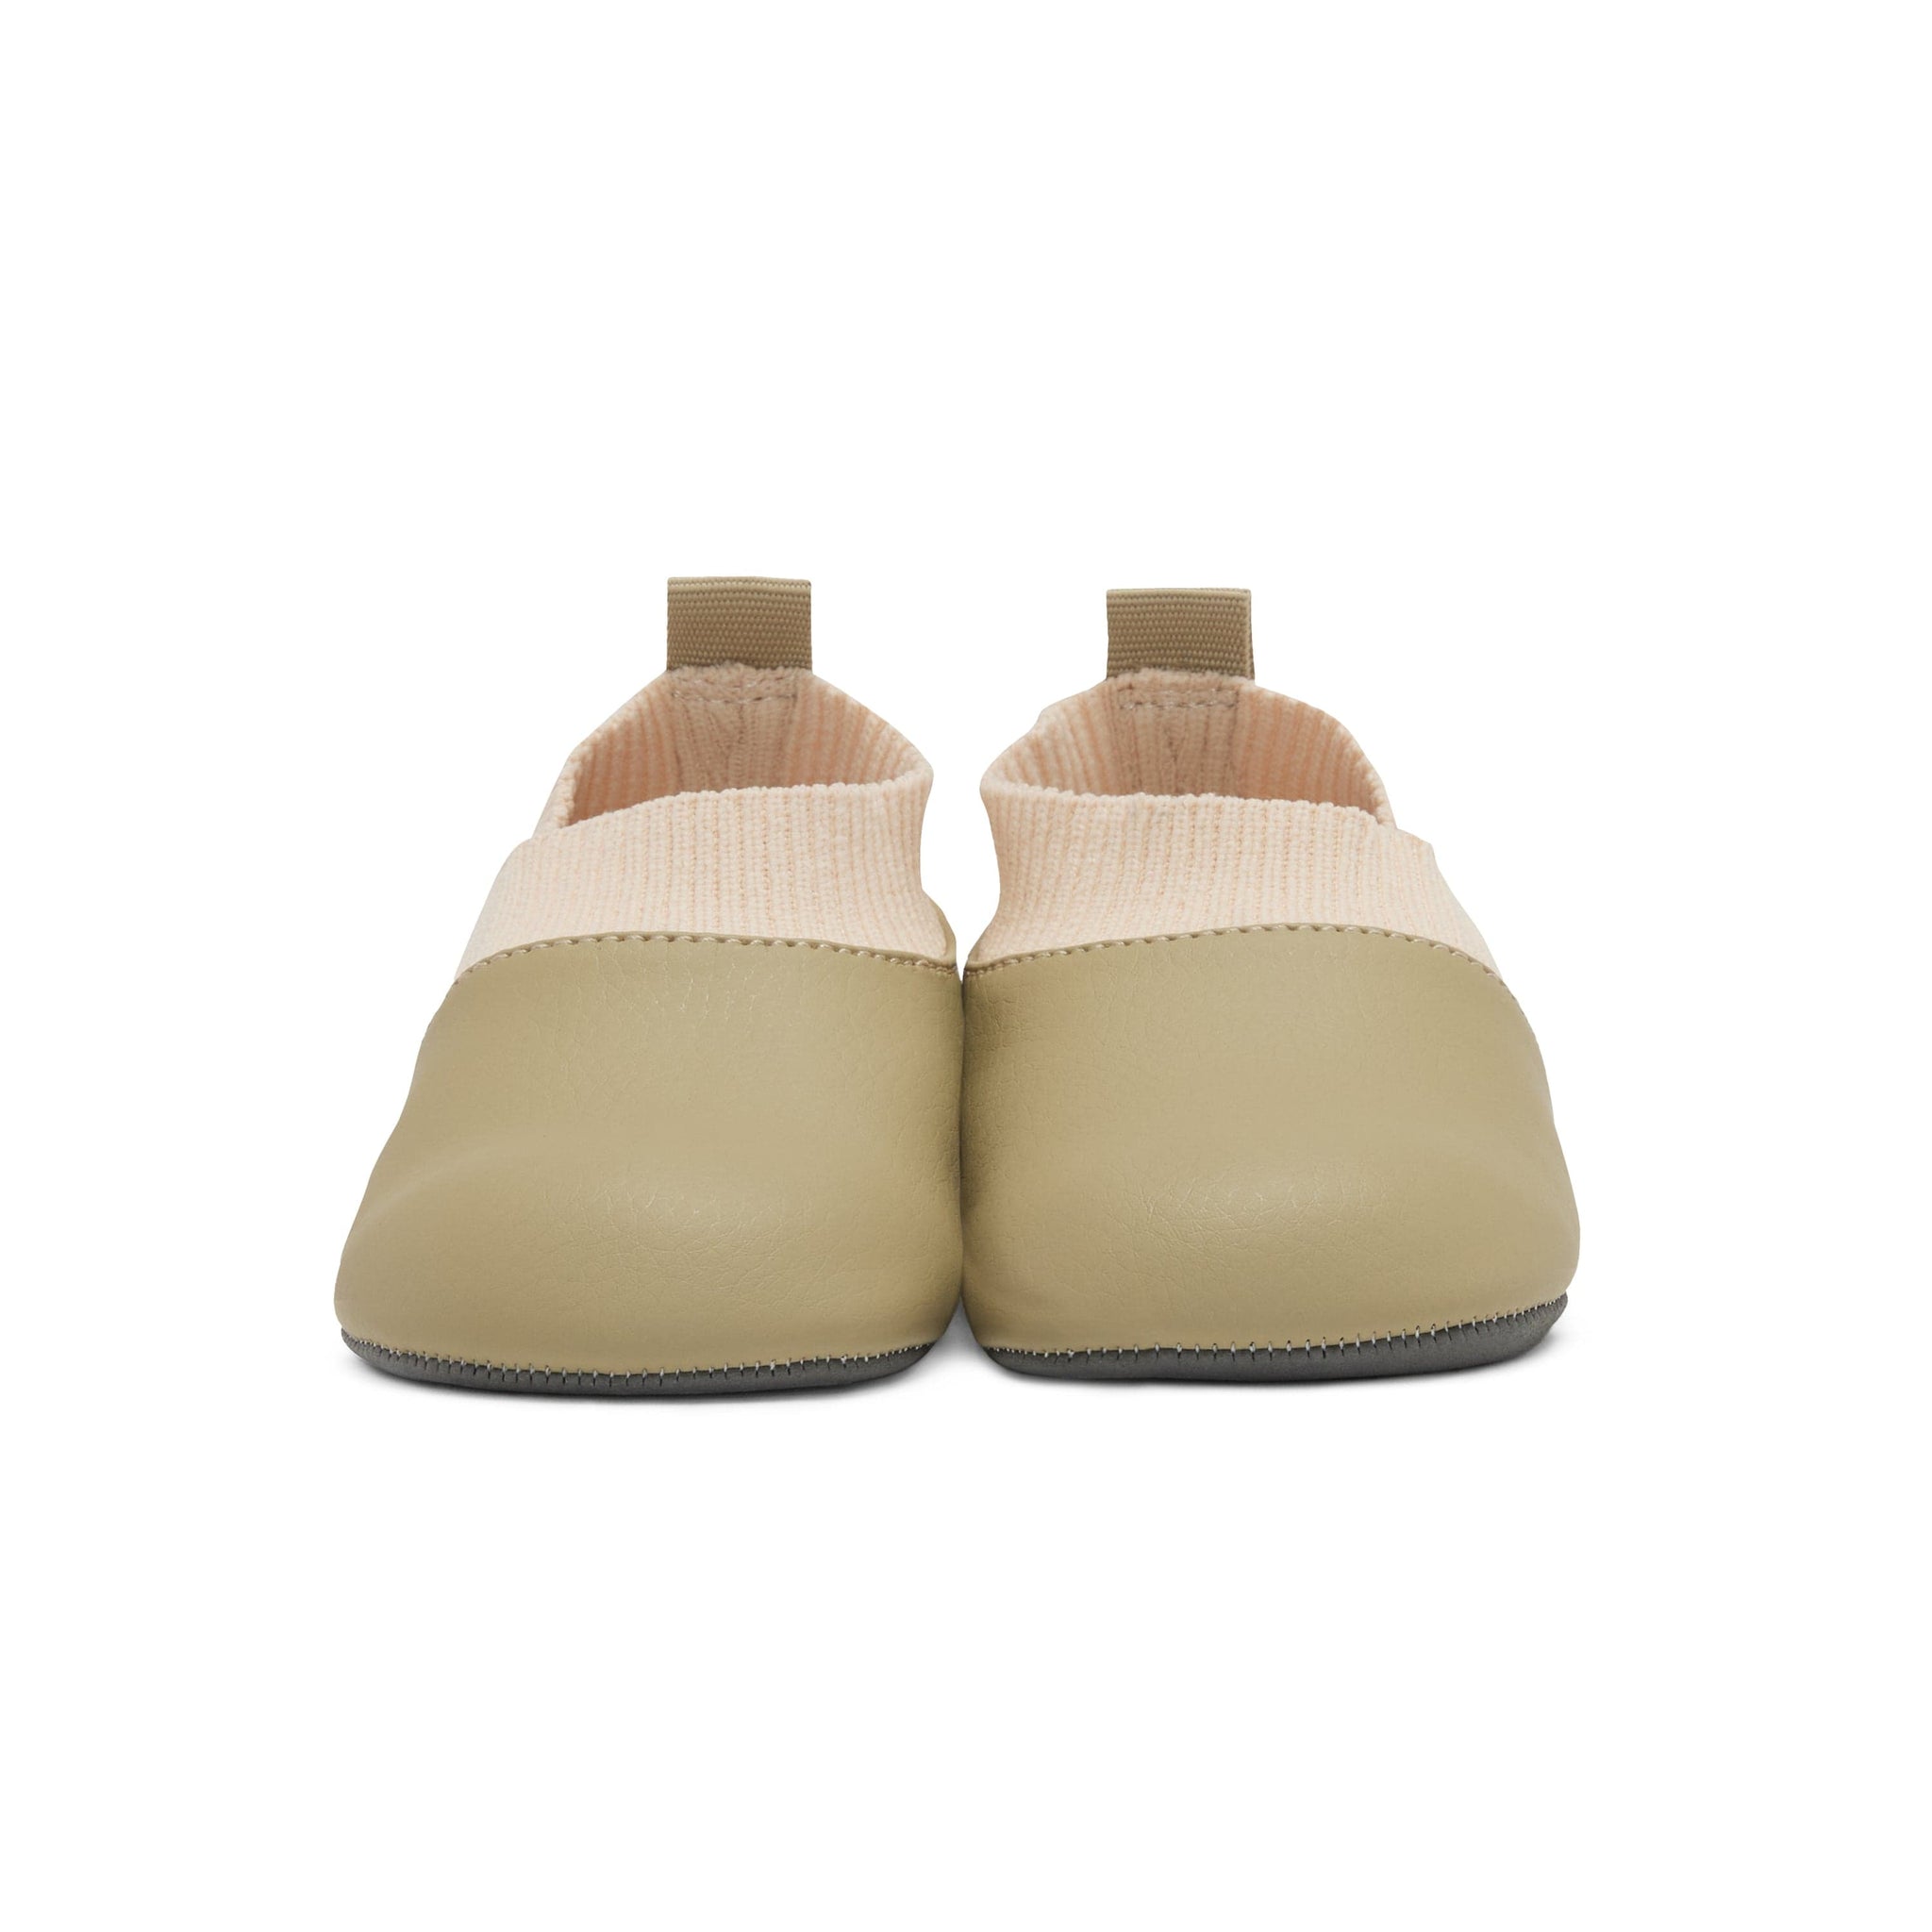 Yale Shoes | Soft Sole Vegan Leather Baby Slippers 0-24 months | Stonz